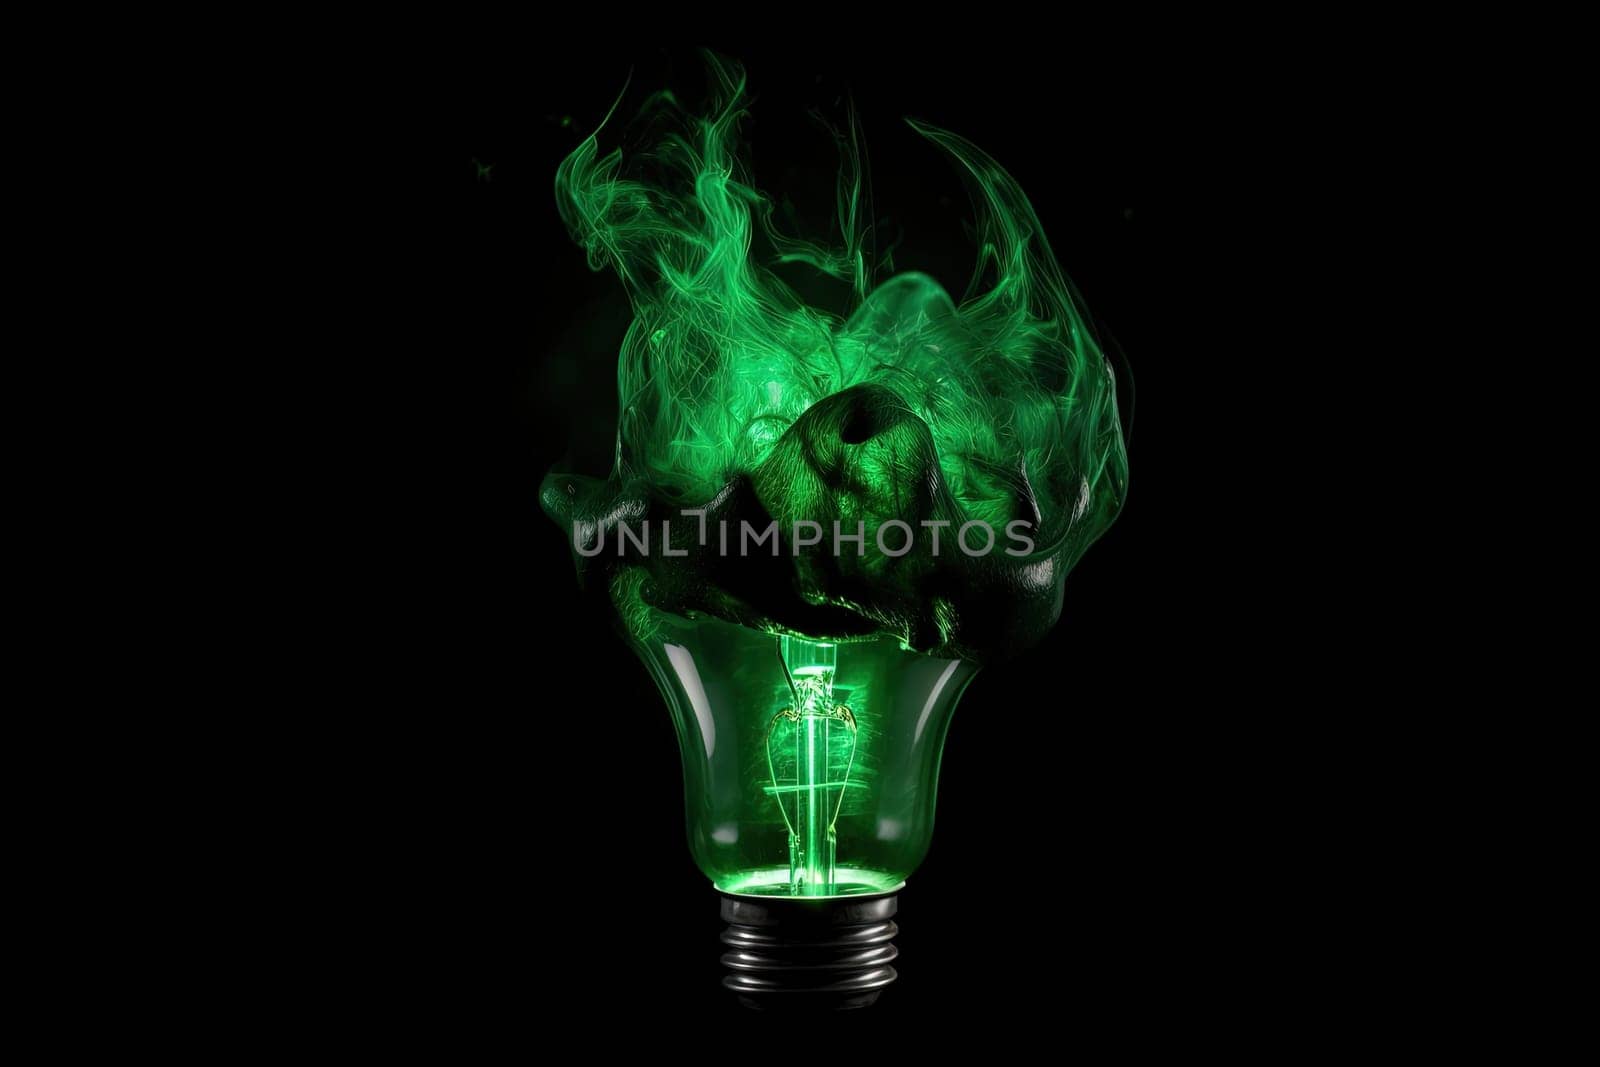 Electric Bulb With Green Smoke Inside On Black Background, Concept Of Ecological Problems by GekaSkr